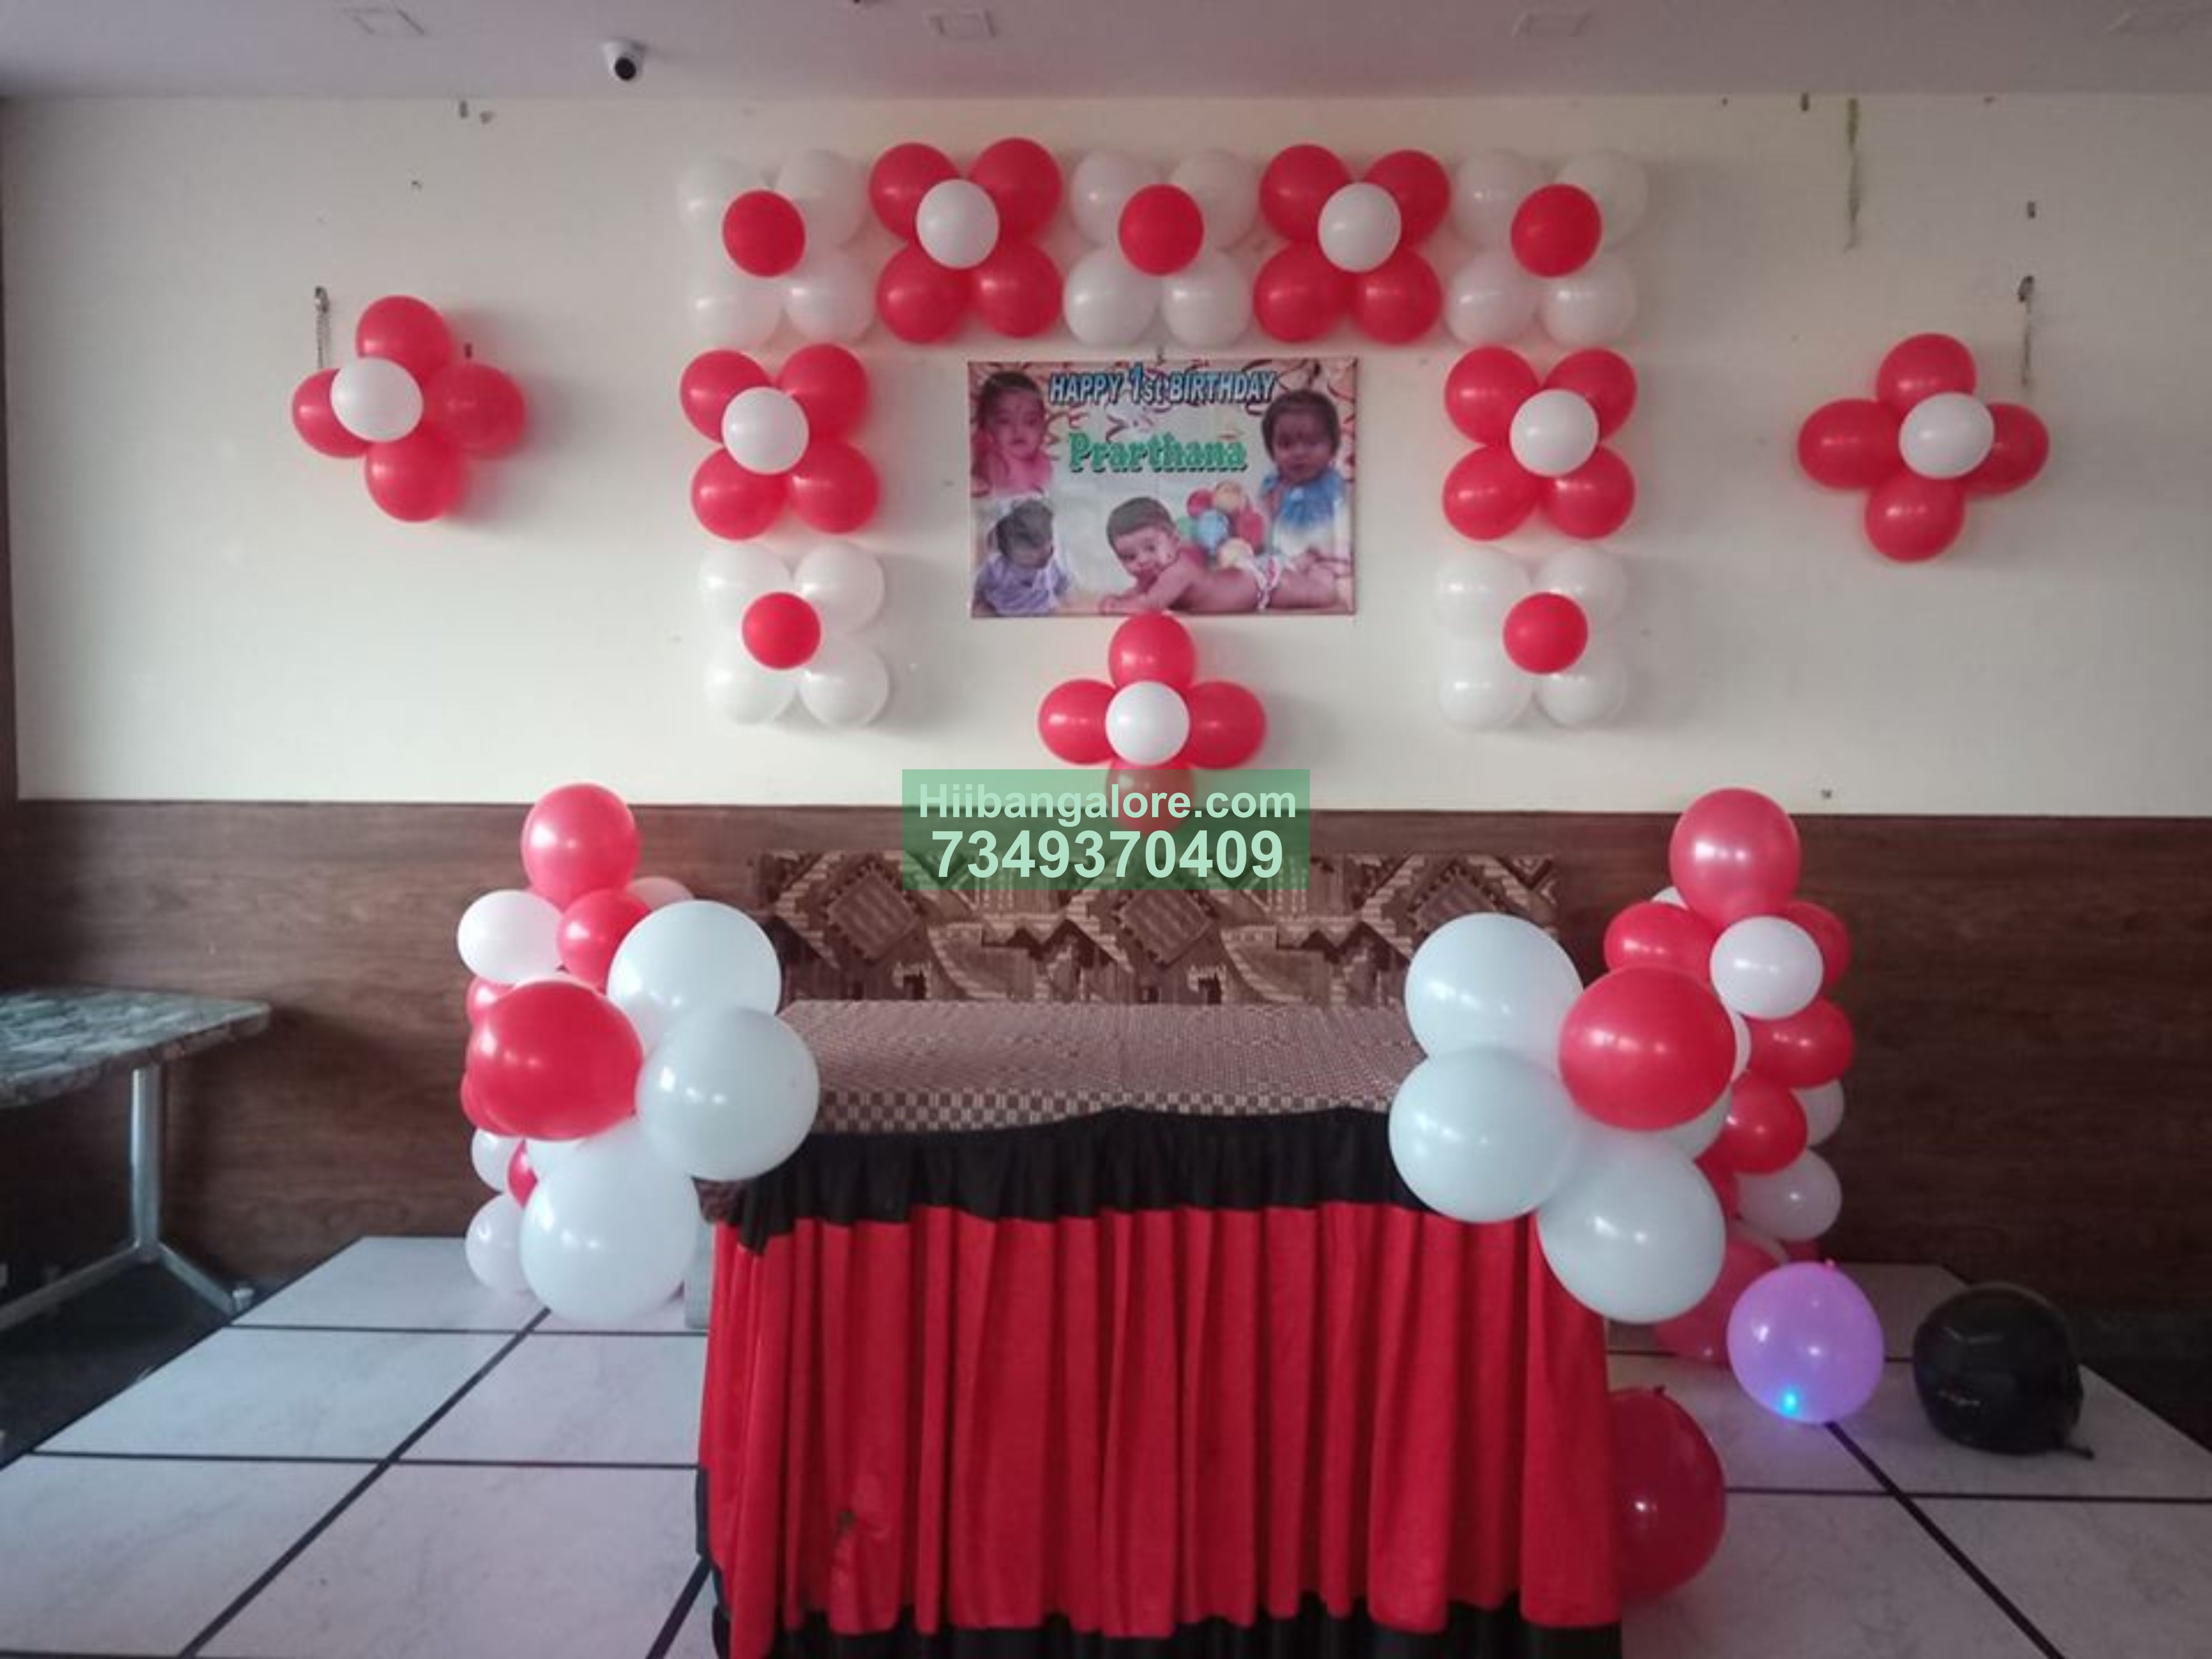 Red and white balloon decoration at home with name board Bangalore